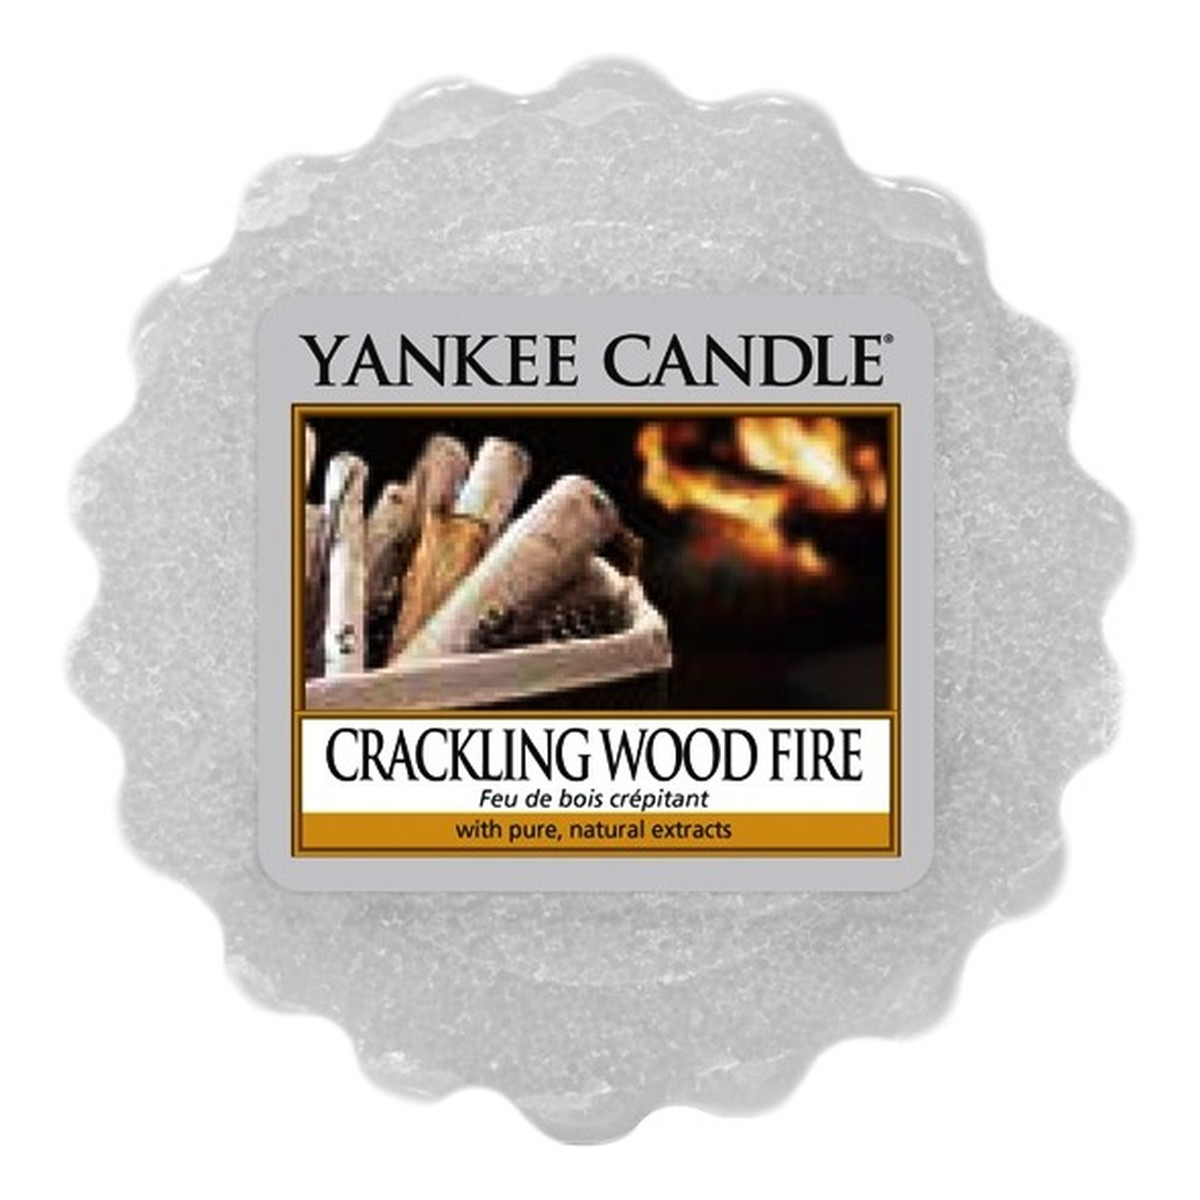 Yankee Candle Wax wosk zapachowy Crackling Wood Fire 22g